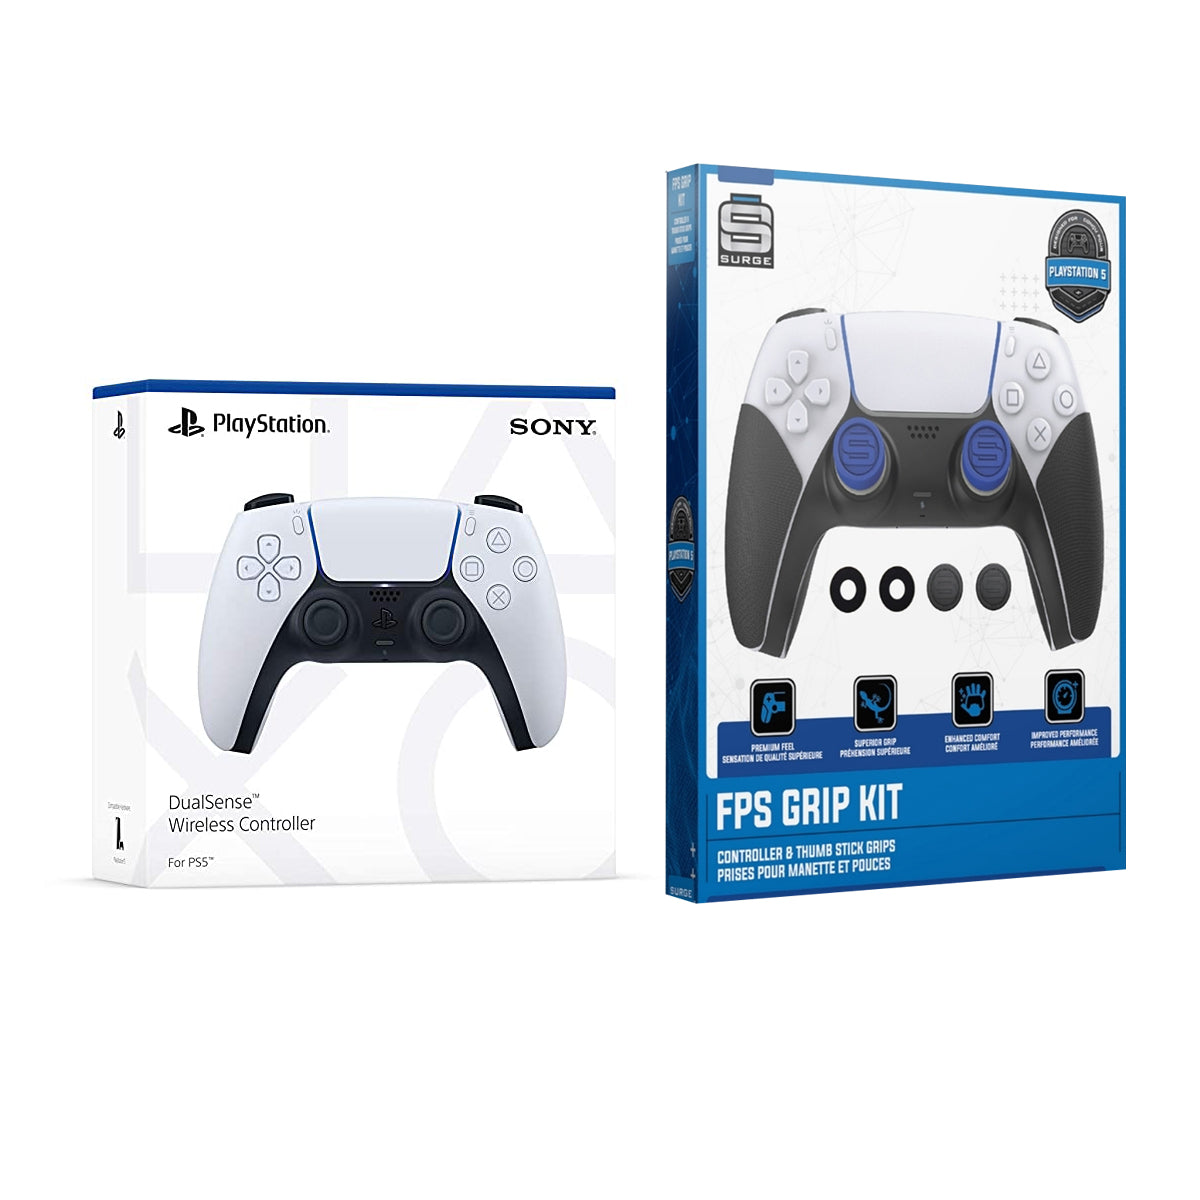 Sony PlayStation 5 DualSense Wireless Controller with FPS Grip Kit Bundle - White - Pro-Distributing